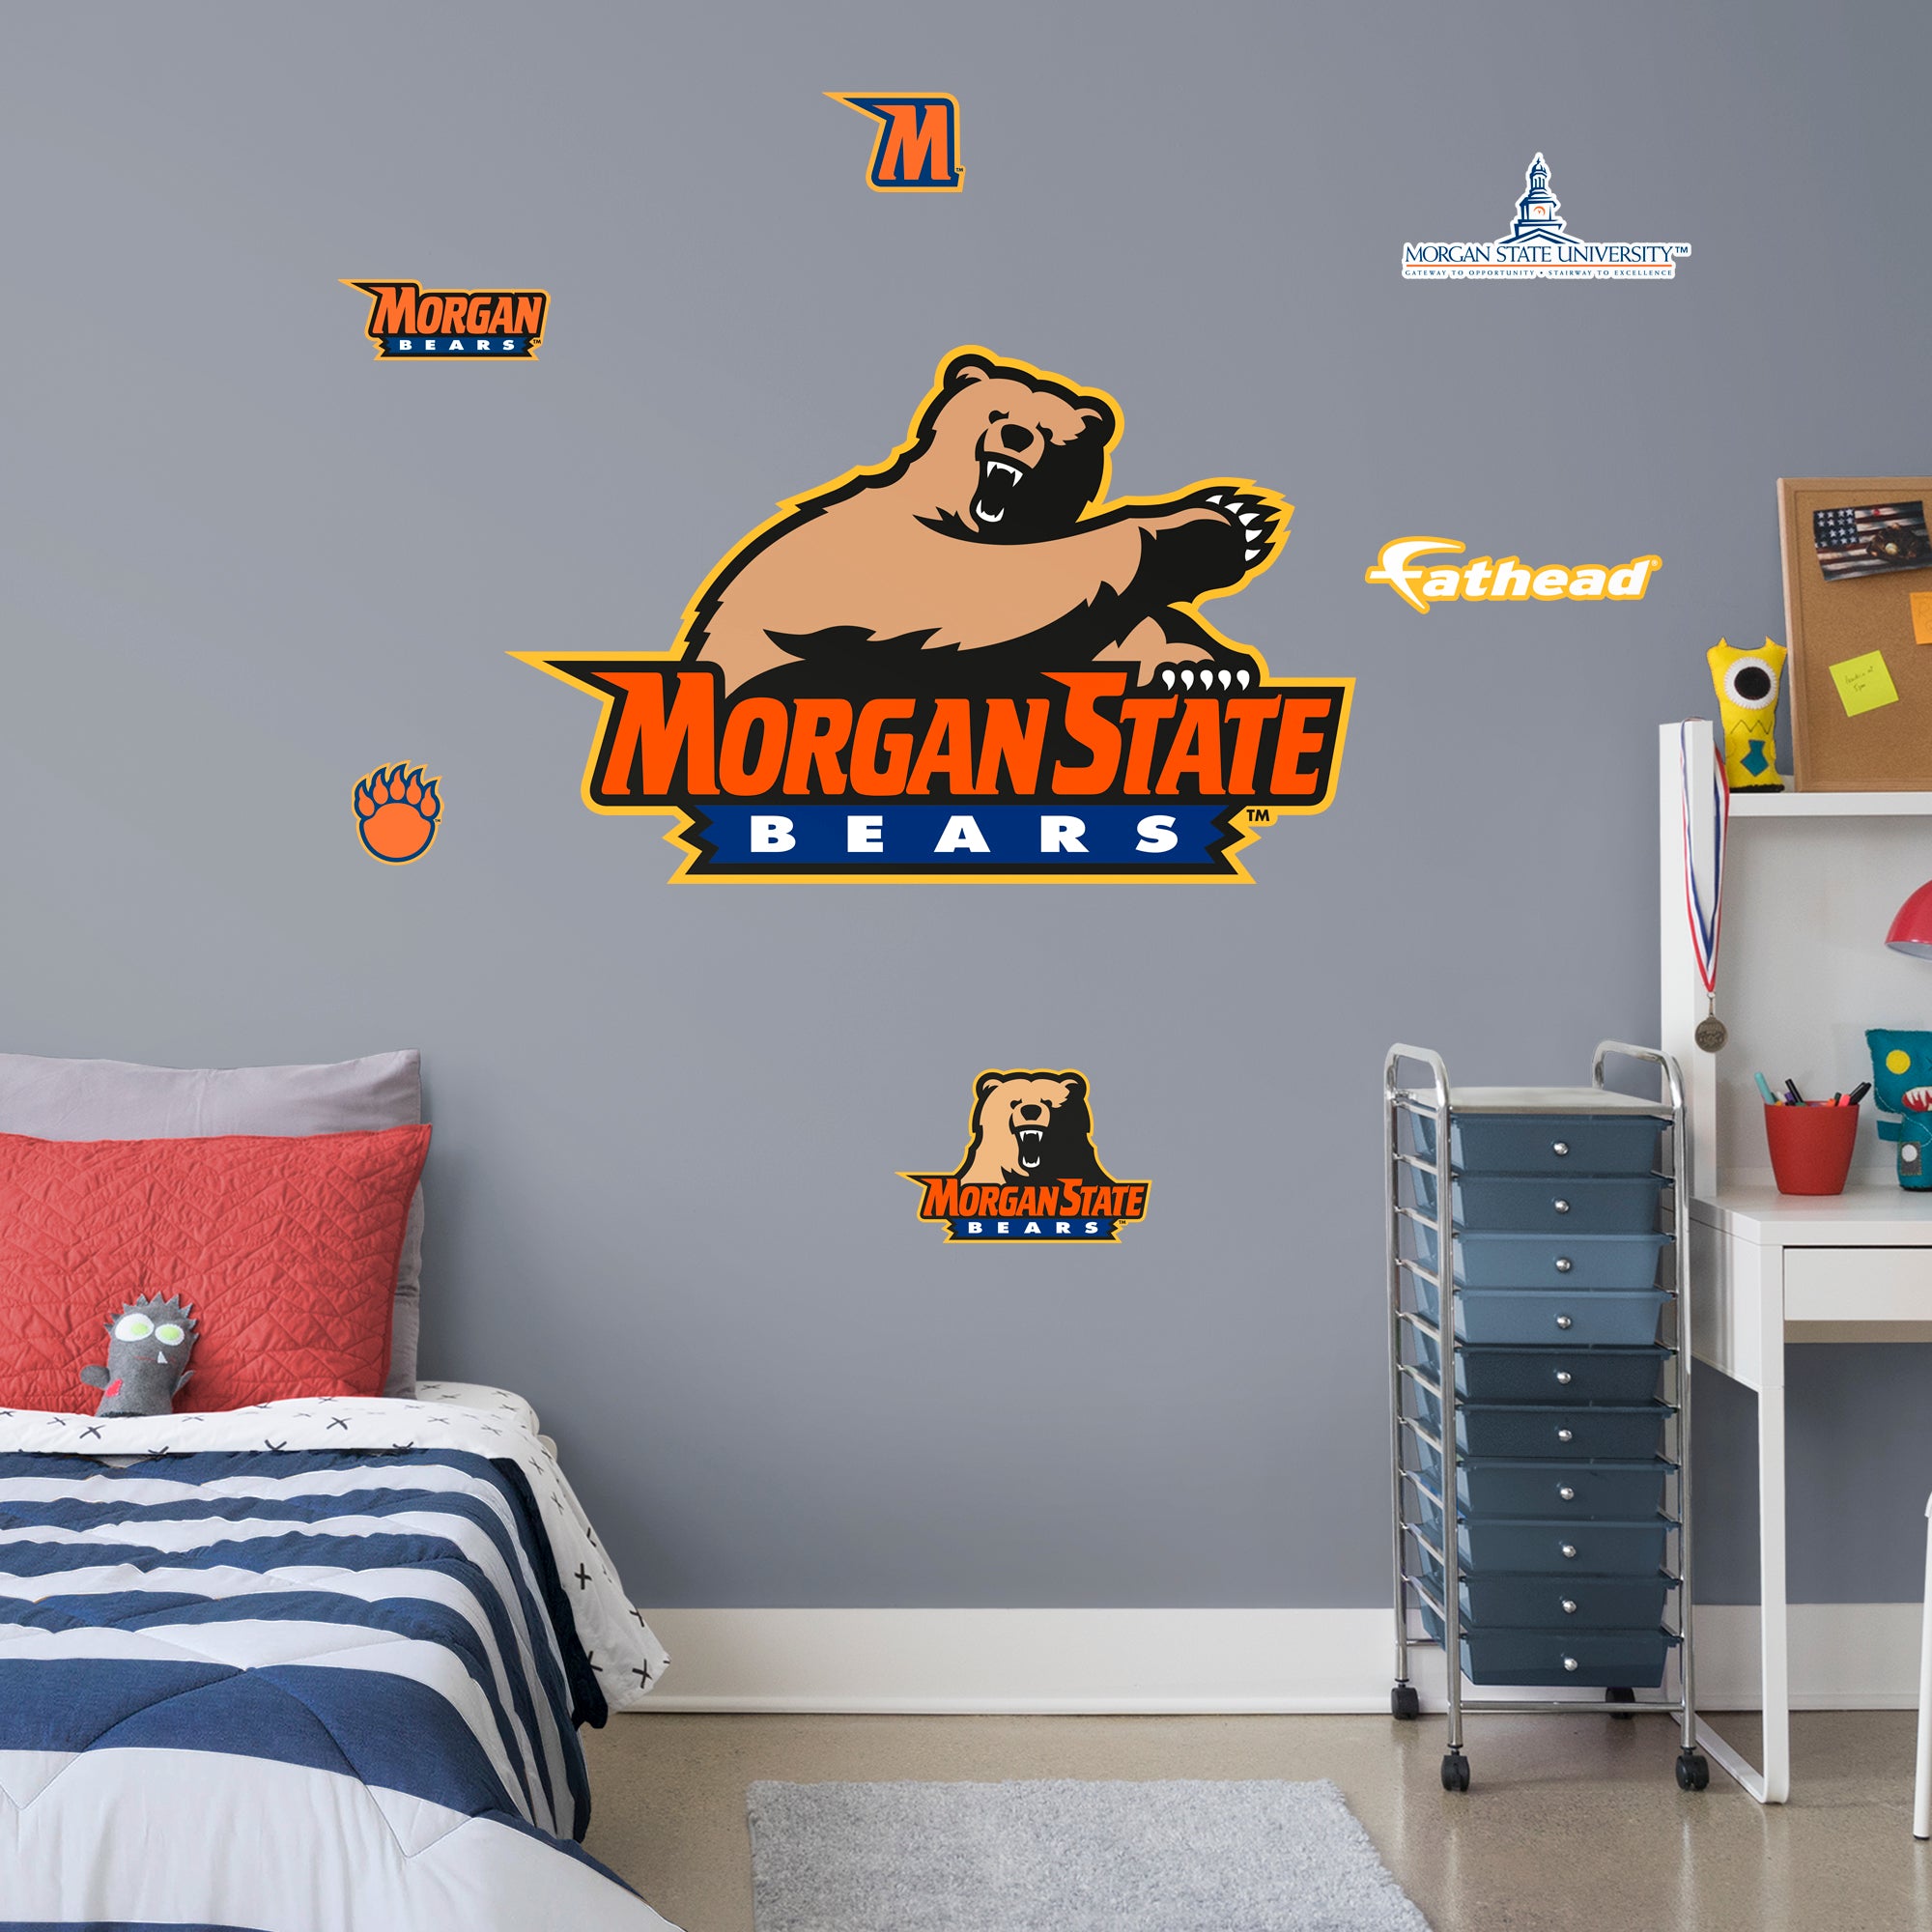 Morgan State University RealBig Logo - Officially Licensed NCAA Removable Wall Decal Giant Decal (30"W x 48"H) by Fathead | Viny